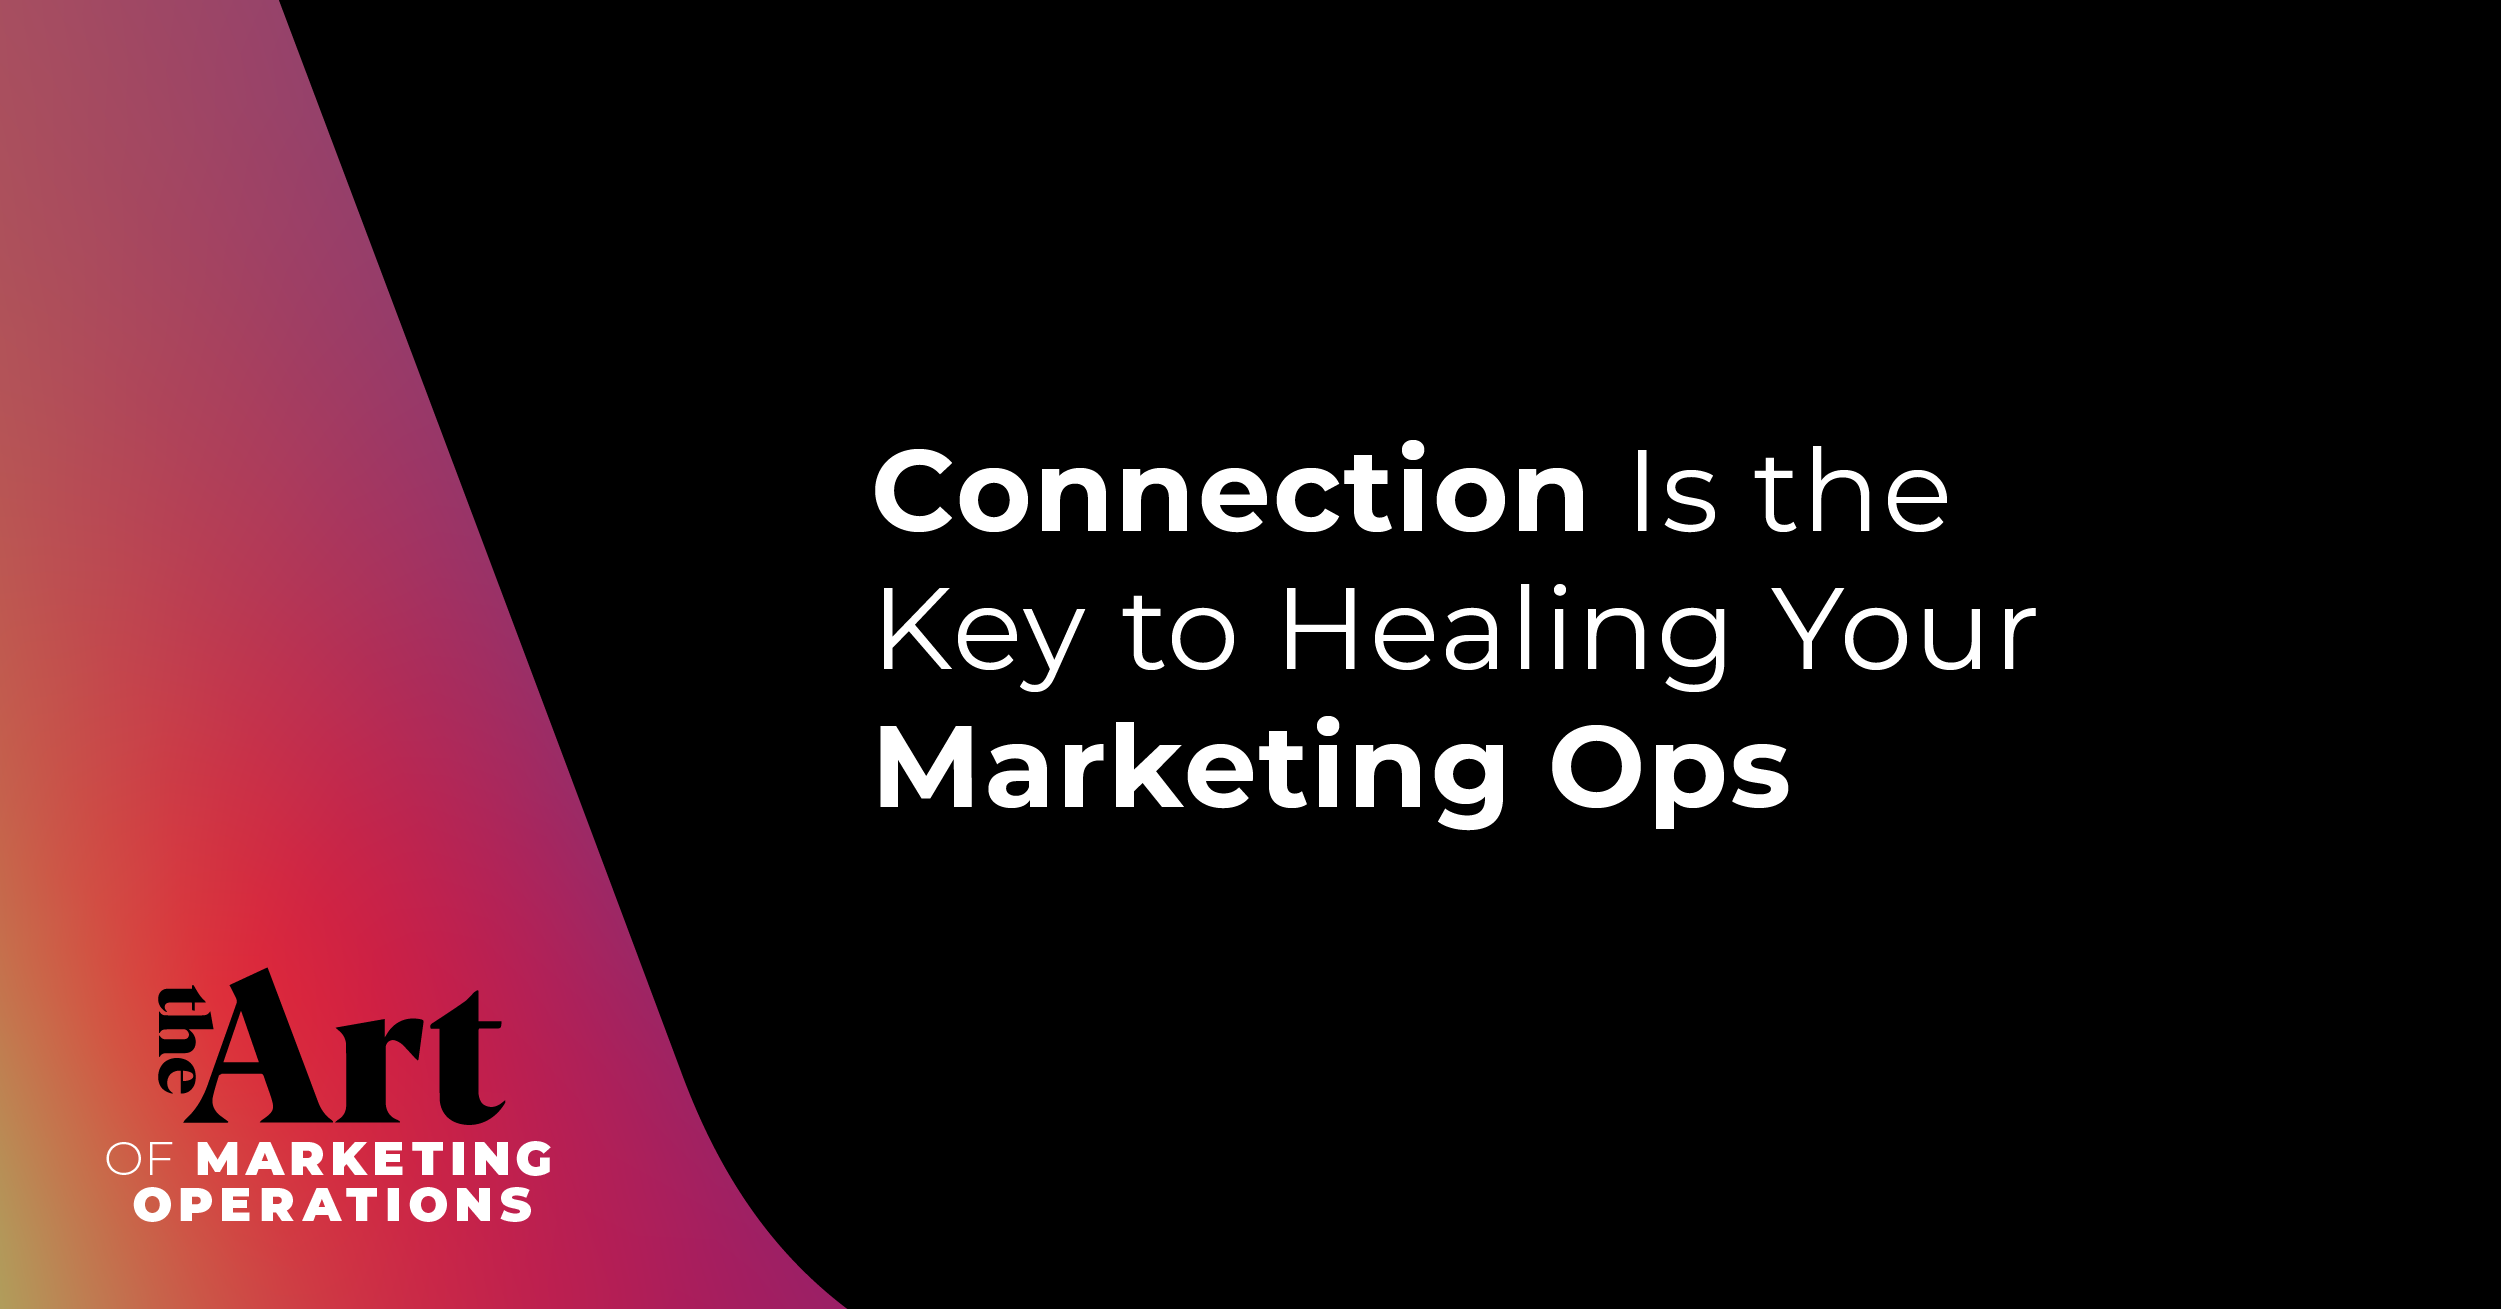 Featured image for article: Ep: 44 - Connection Is the Key to Healing Your Marketing Ops